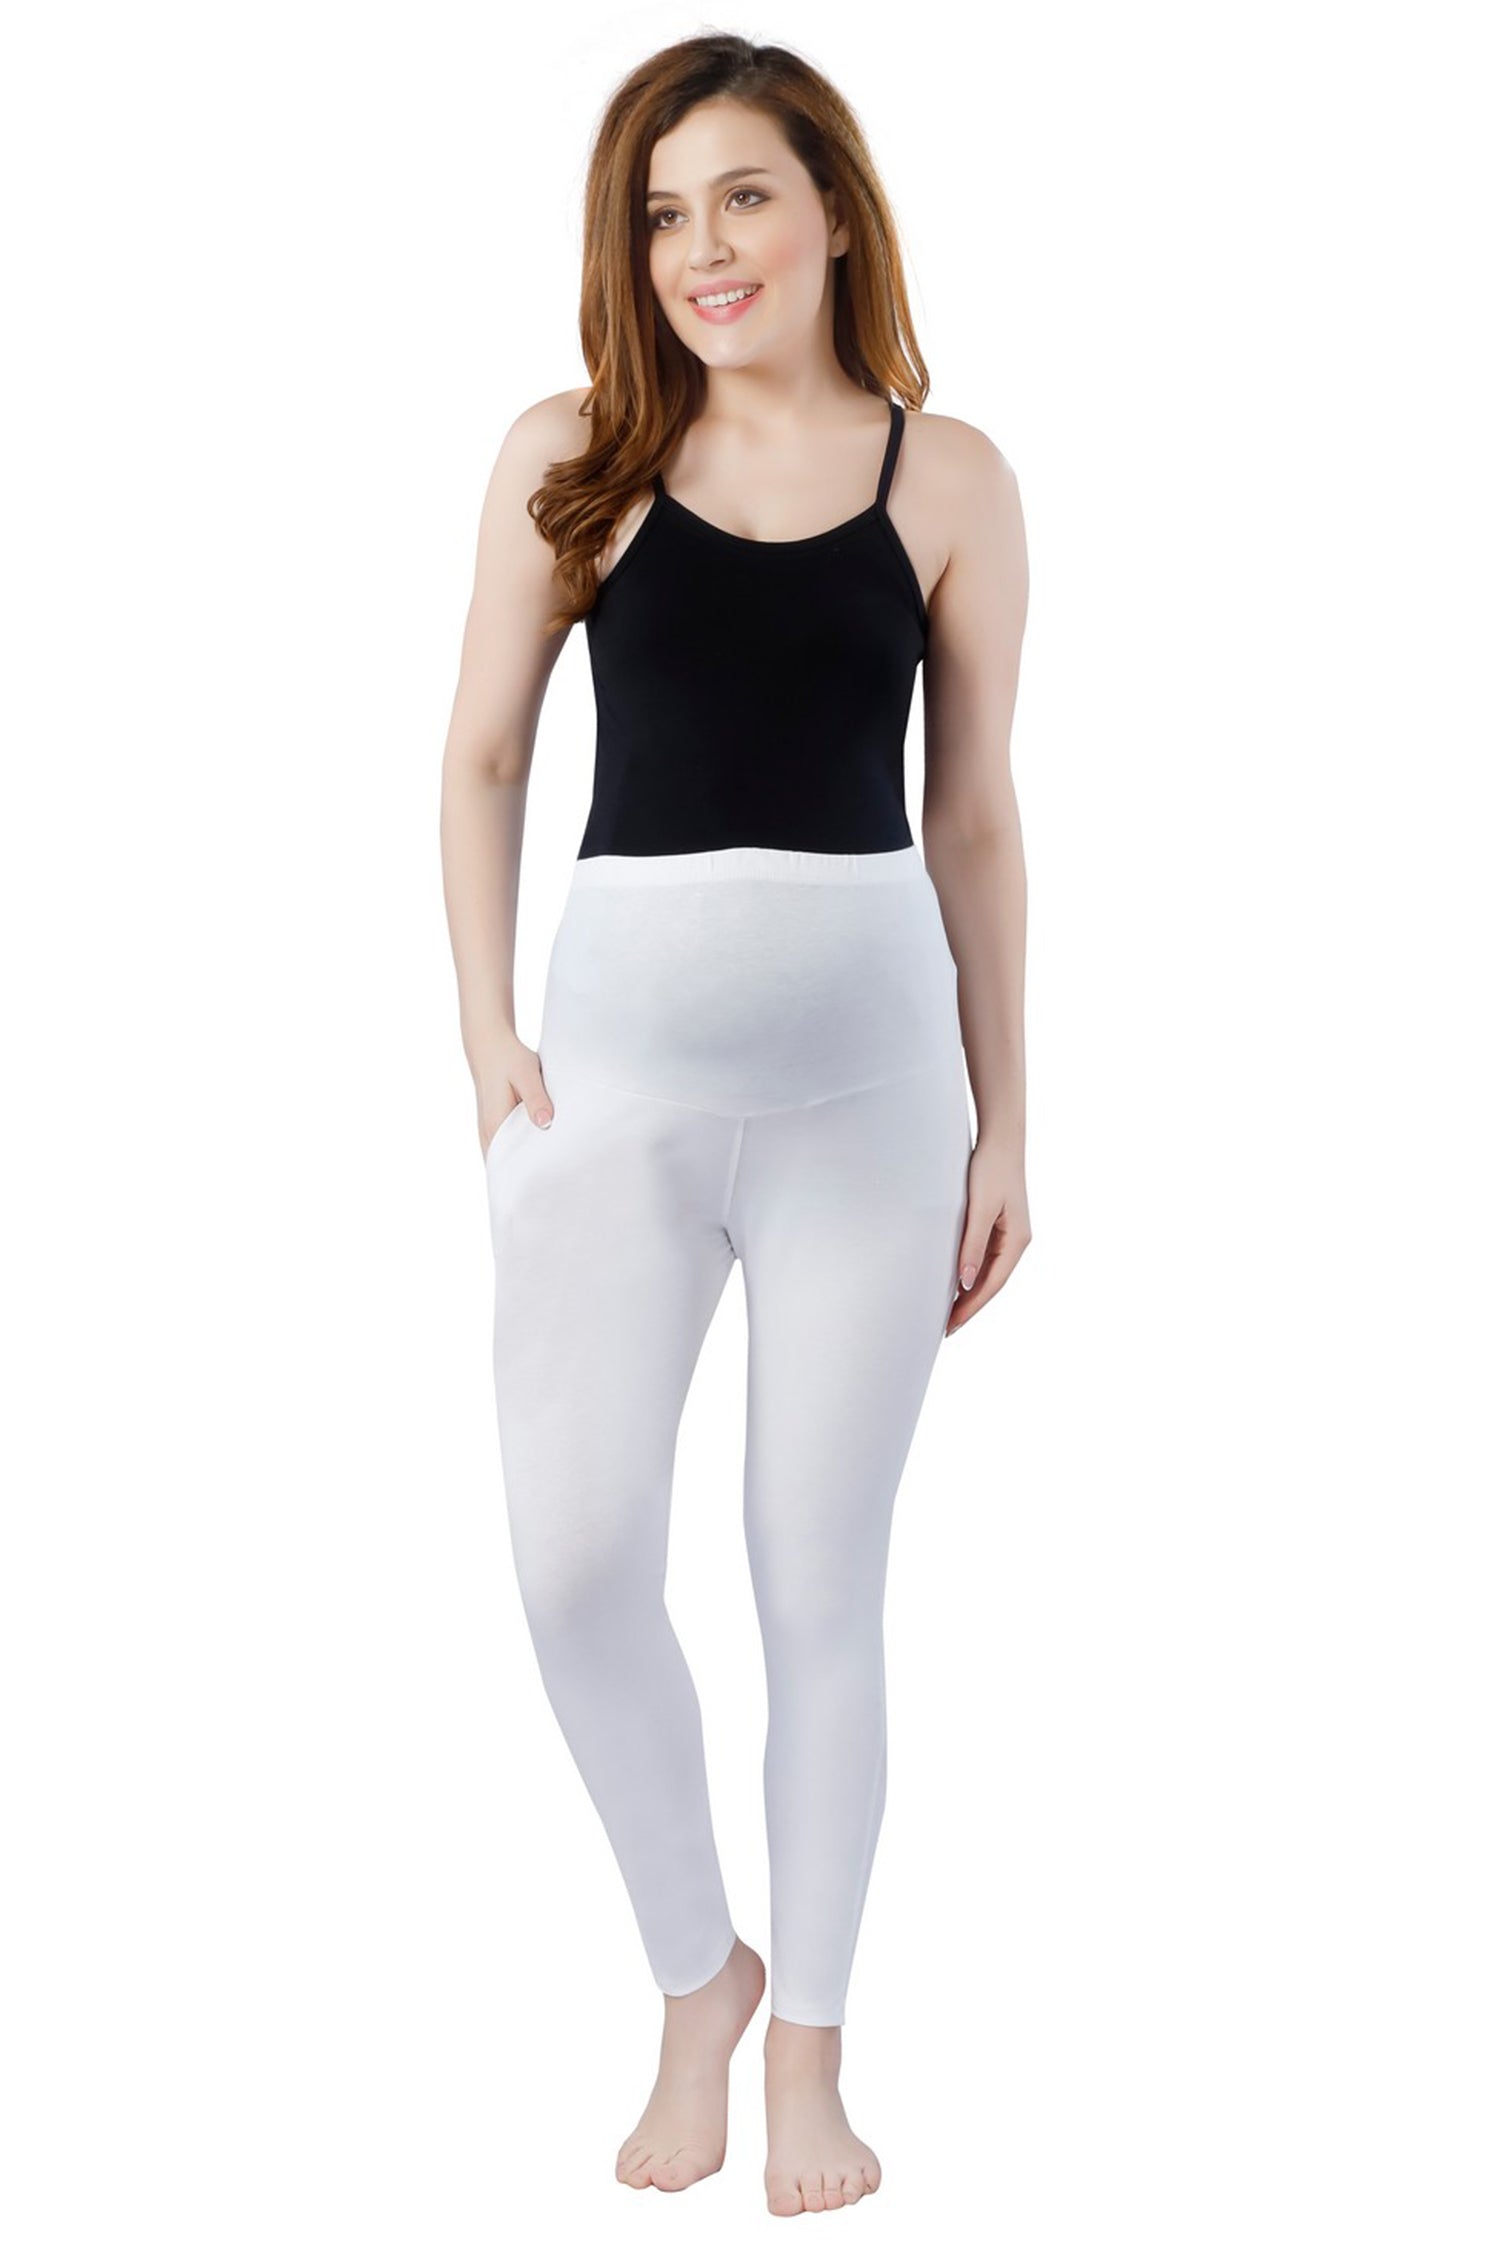 TRASA Women's Maternity Cotton Workout Leggings Over The Belly